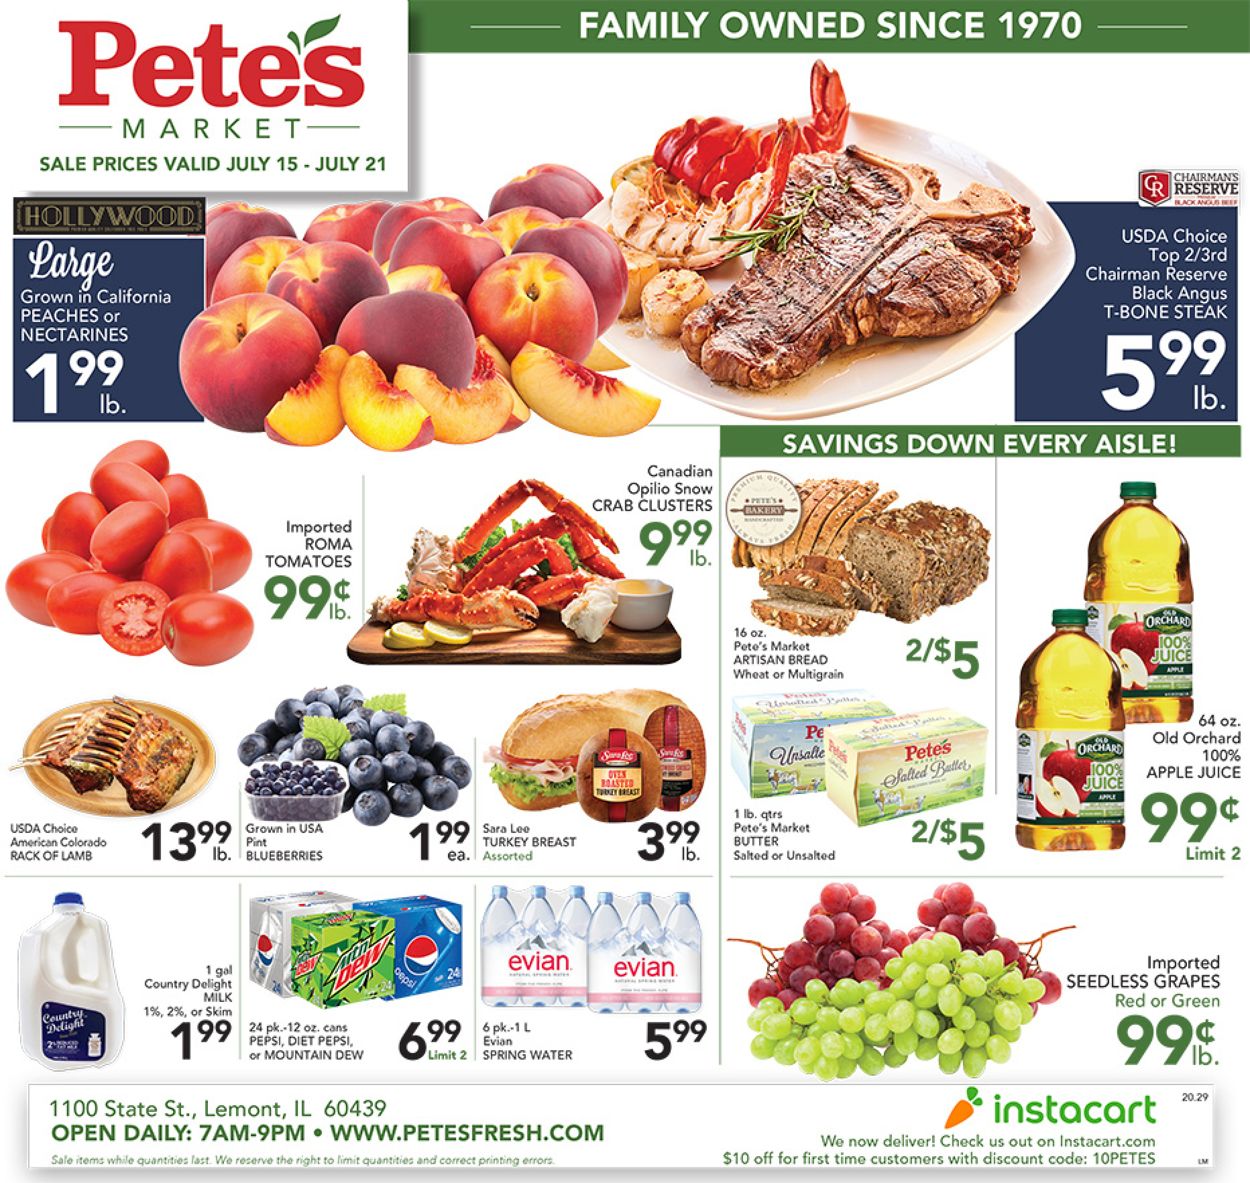 Pete's Fresh Market Current weekly ad 07/15 - 07/21/2020.